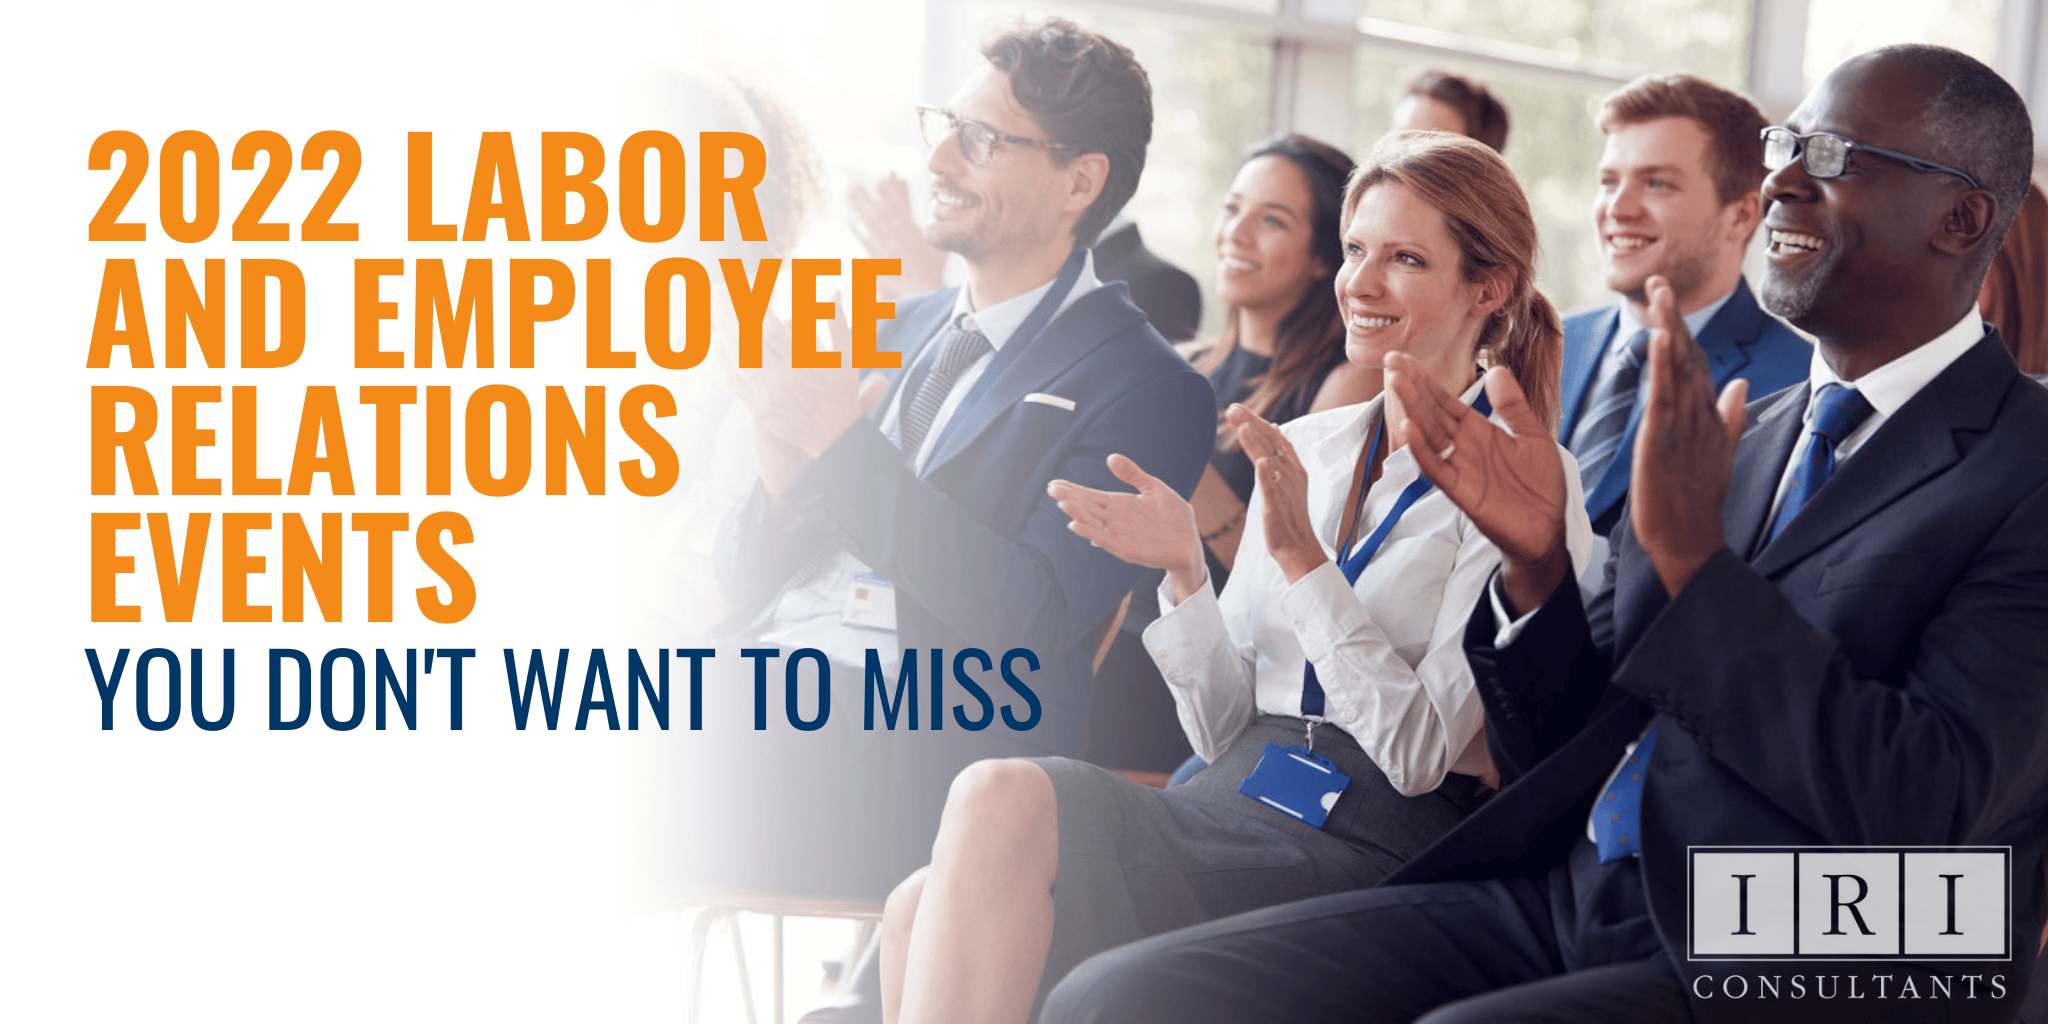 2022 Labor and Employee Relations Events You Don't Want to Miss